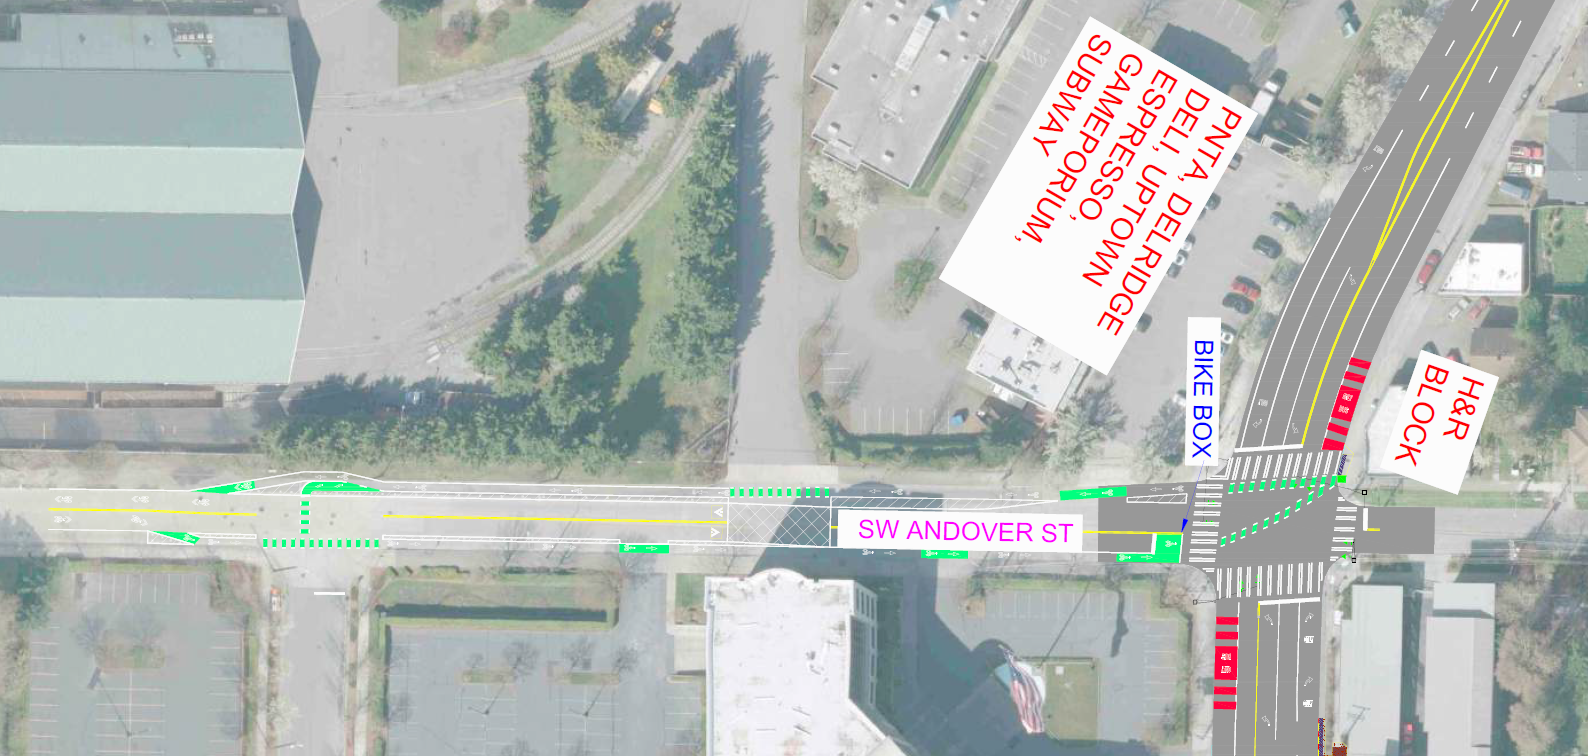 Proposed improvements along SW Andover St to be installed as part of the Delridge Multimodal project. These include new protected bike lanes, green pavement markings, an a left turn pocket for bikes.